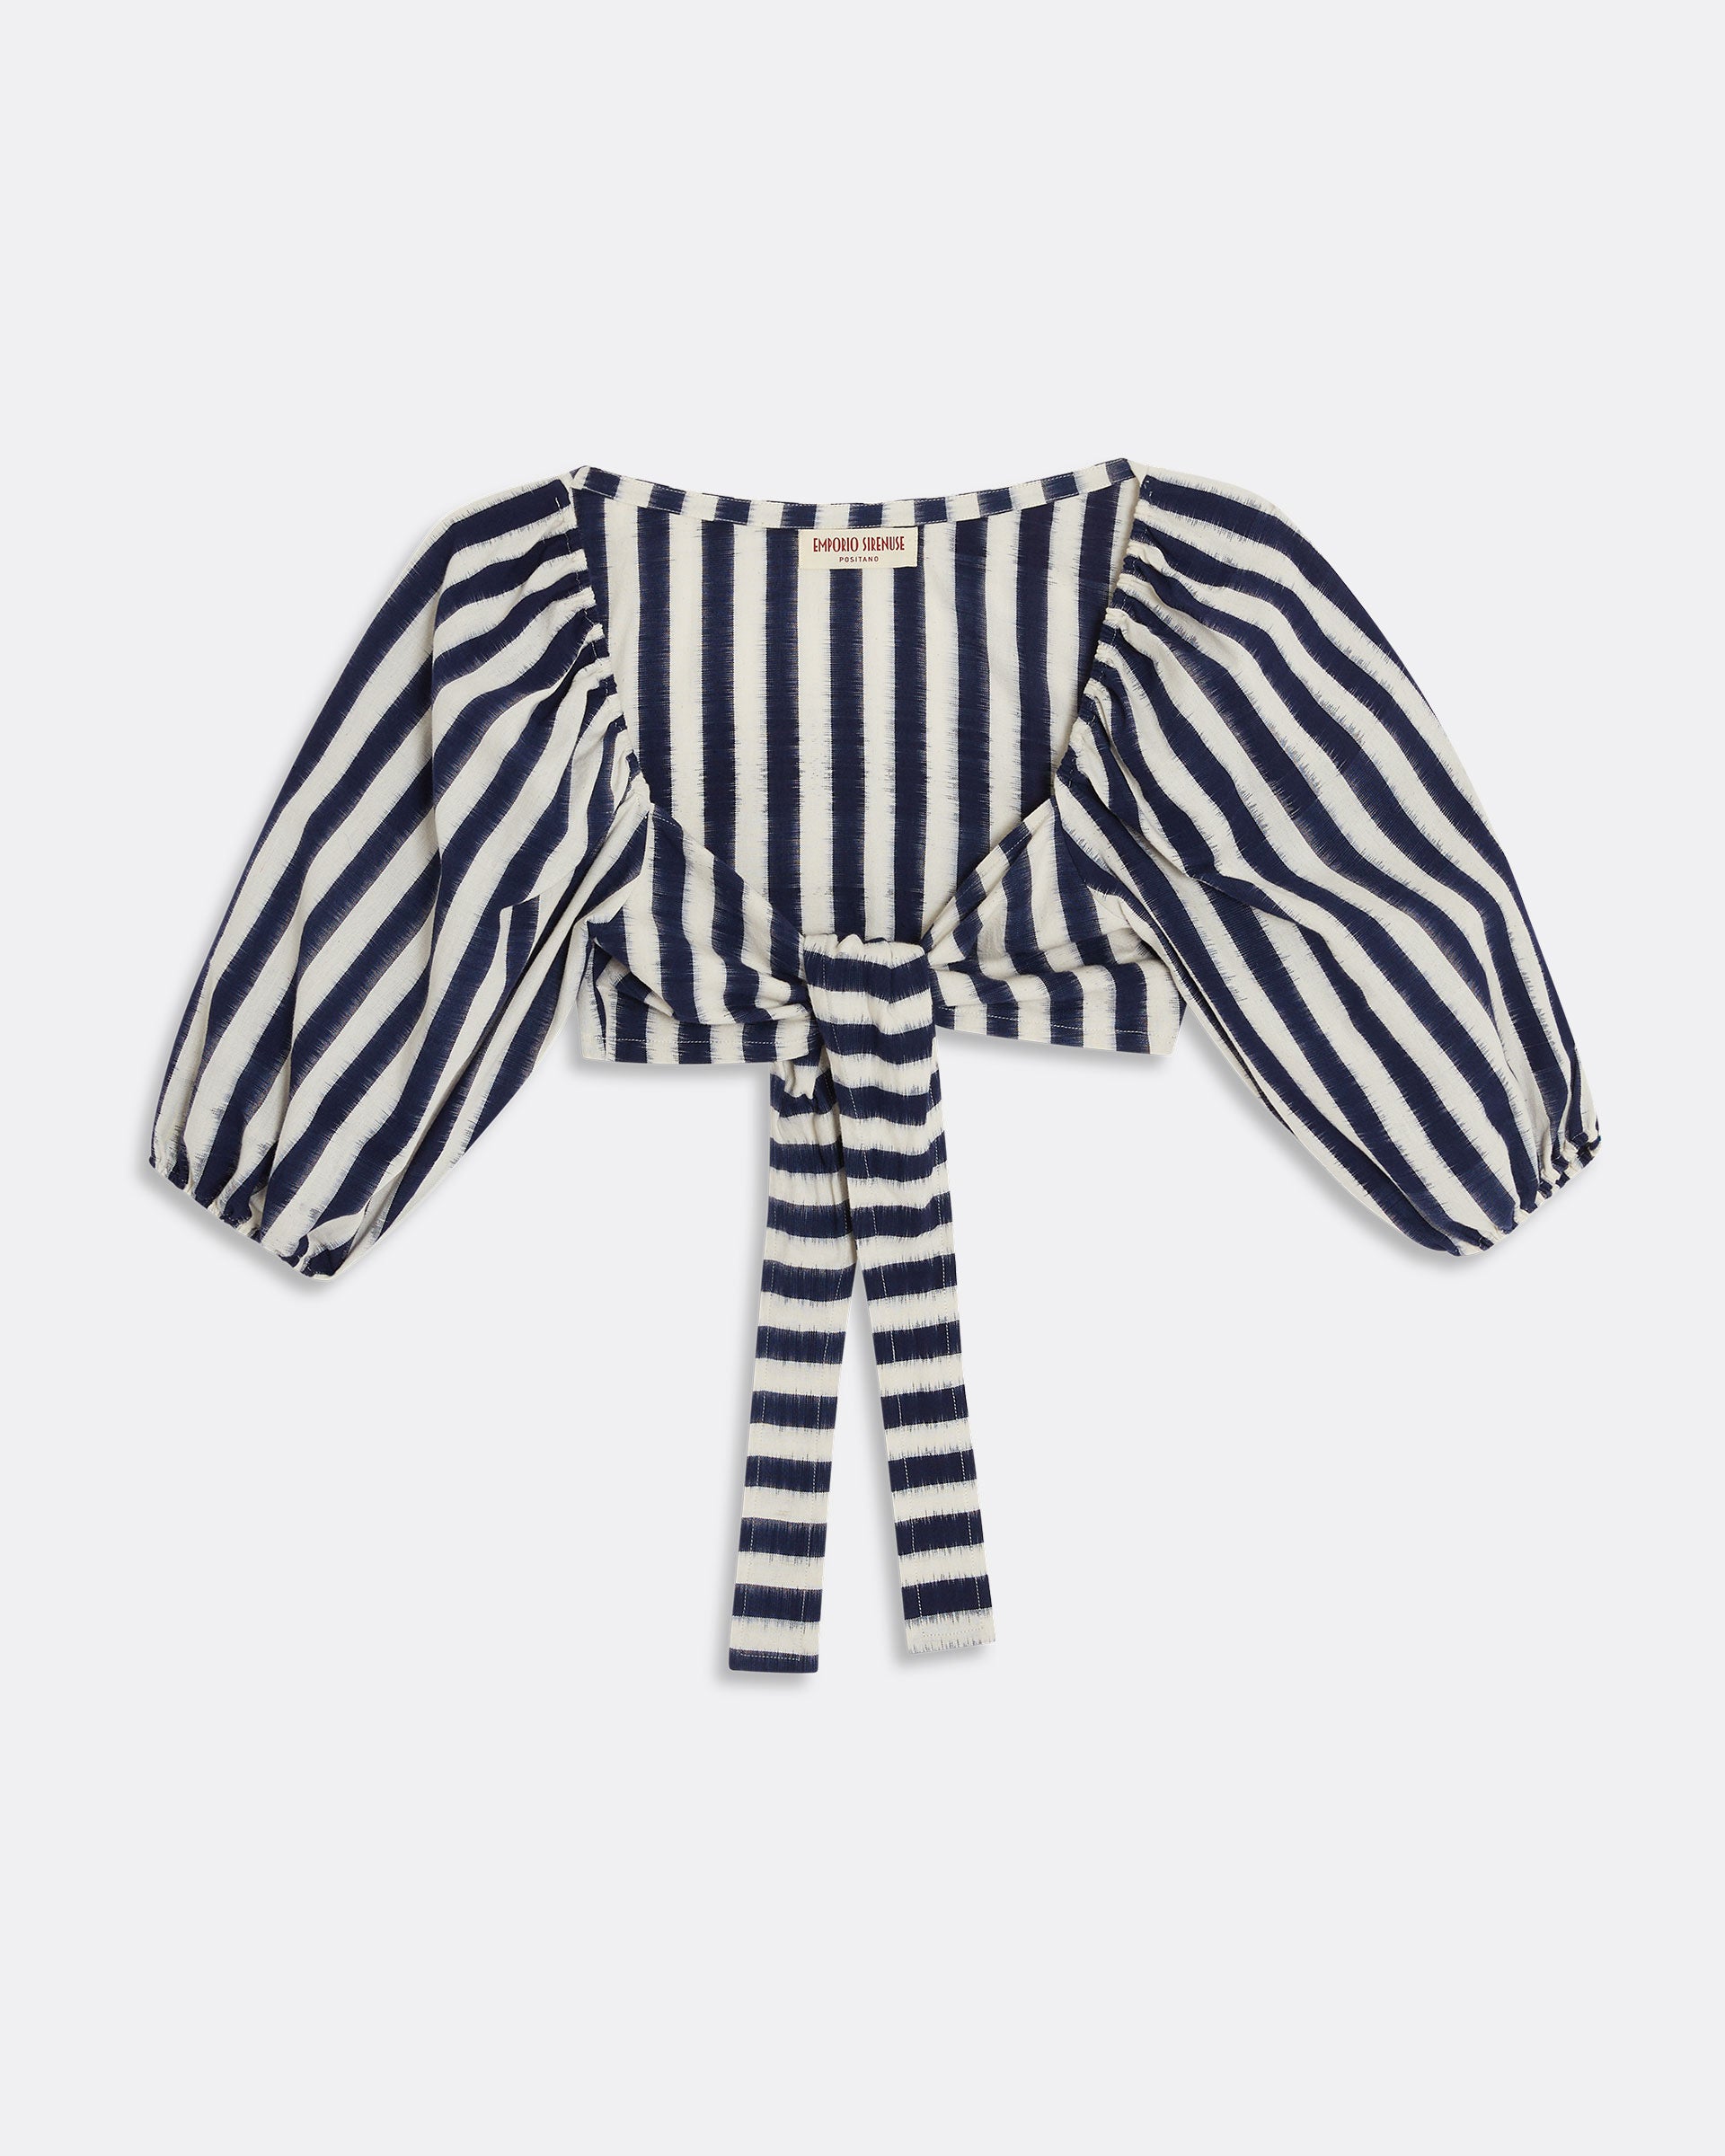 Thaia Top in Ikat Stripes